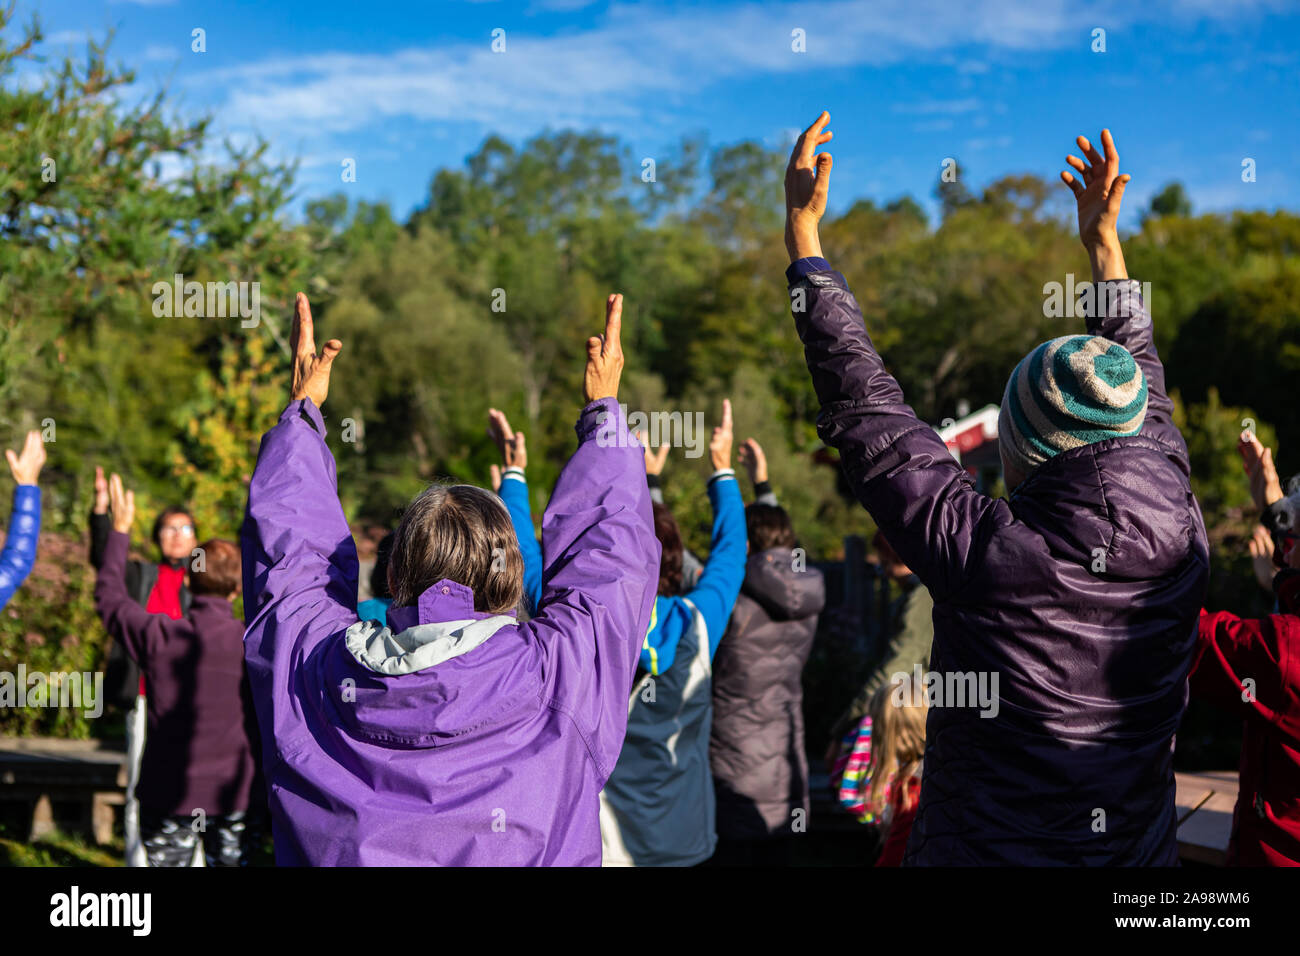 Backside view photo of mixed generation people making big gestures with arms in the air while participating in yoga session  Stock Photo